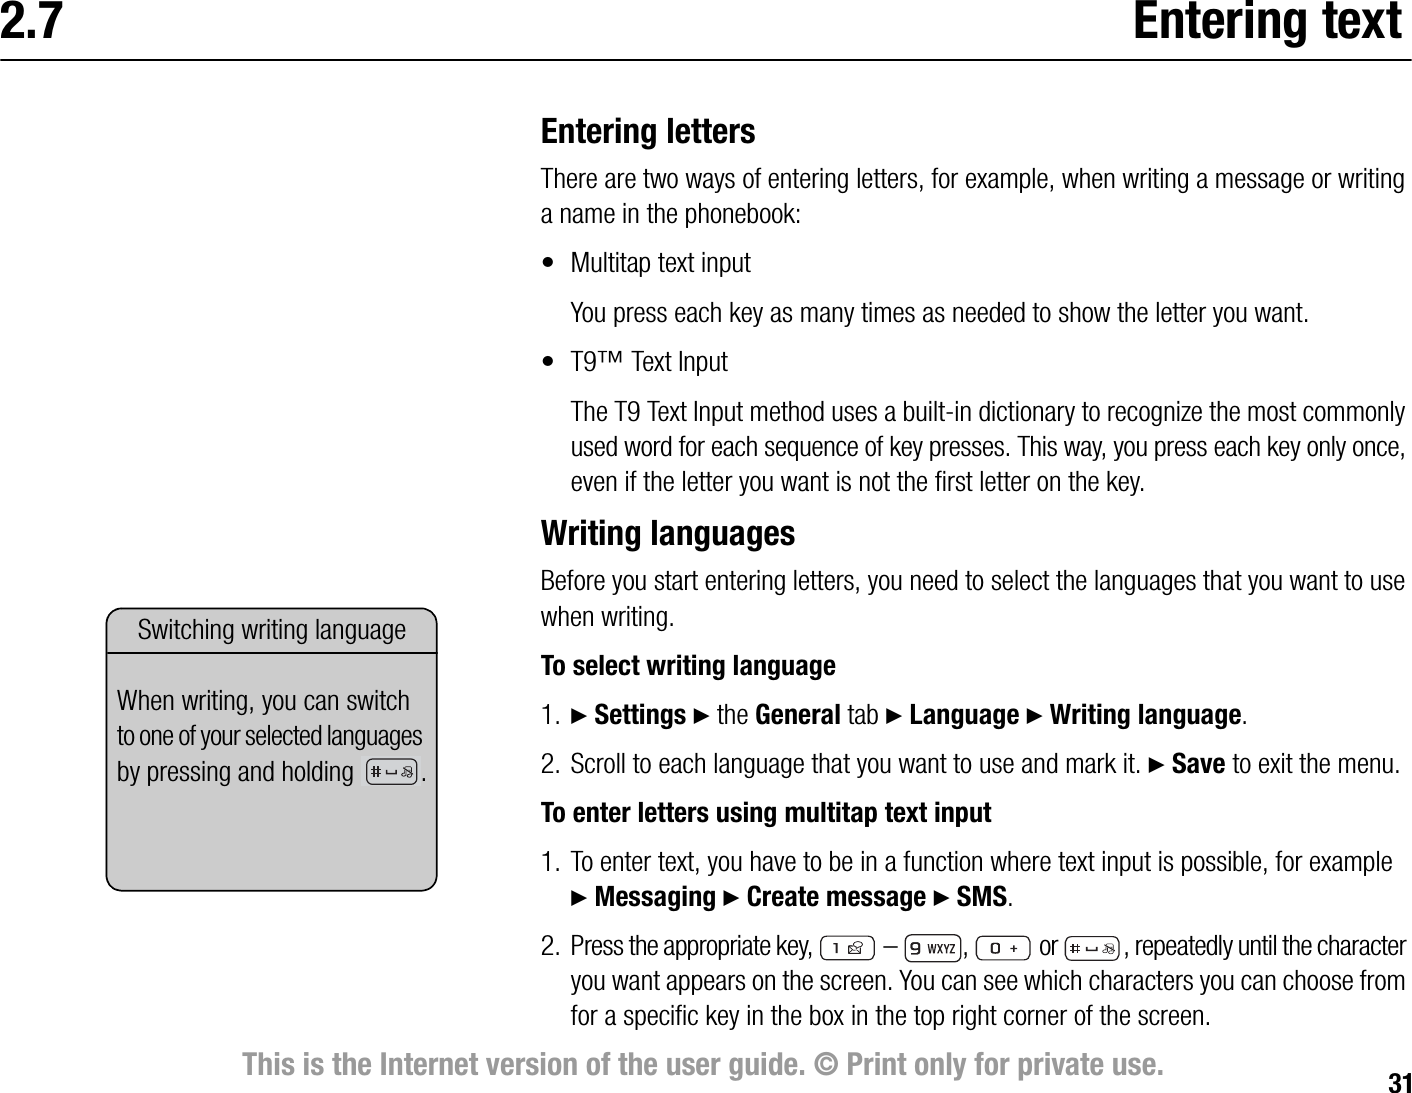 31This is the Internet version of the user guide. © Print only for private use.2.7 Entering textEntering lettersThere are two ways of entering letters, for example, when writing a message or writing a name in the phonebook:• Multitap text inputYou press each key as many times as needed to show the letter you want.•T9™ Text InputThe T9 Text Input method uses a builtin dictionary to recognize the most commonly used word for each sequence of key presses. This way, you press each key only once, even if the letter you want is not the first letter on the key.Writing languagesBefore you start entering letters, you need to select the languages that you want to use when writing.To select writing language1. } Settings } the General tab } Language } Writing language.2. Scroll to each language that you want to use and mark it. } Save to exit the menu.To enter letters using multitap text input1. To enter text, you have to be in a function where text input is possible, for example }Messaging } Create message } SMS.2. Press the appropriate key,   –  ,   or  , repeatedly until the character you want appears on the screen. You can see which characters you can choose from for a specific key in the box in the top right corner of the screen.Switching writing languageWhen writing, you can switch to one of your selected languages by pressing and holding  .